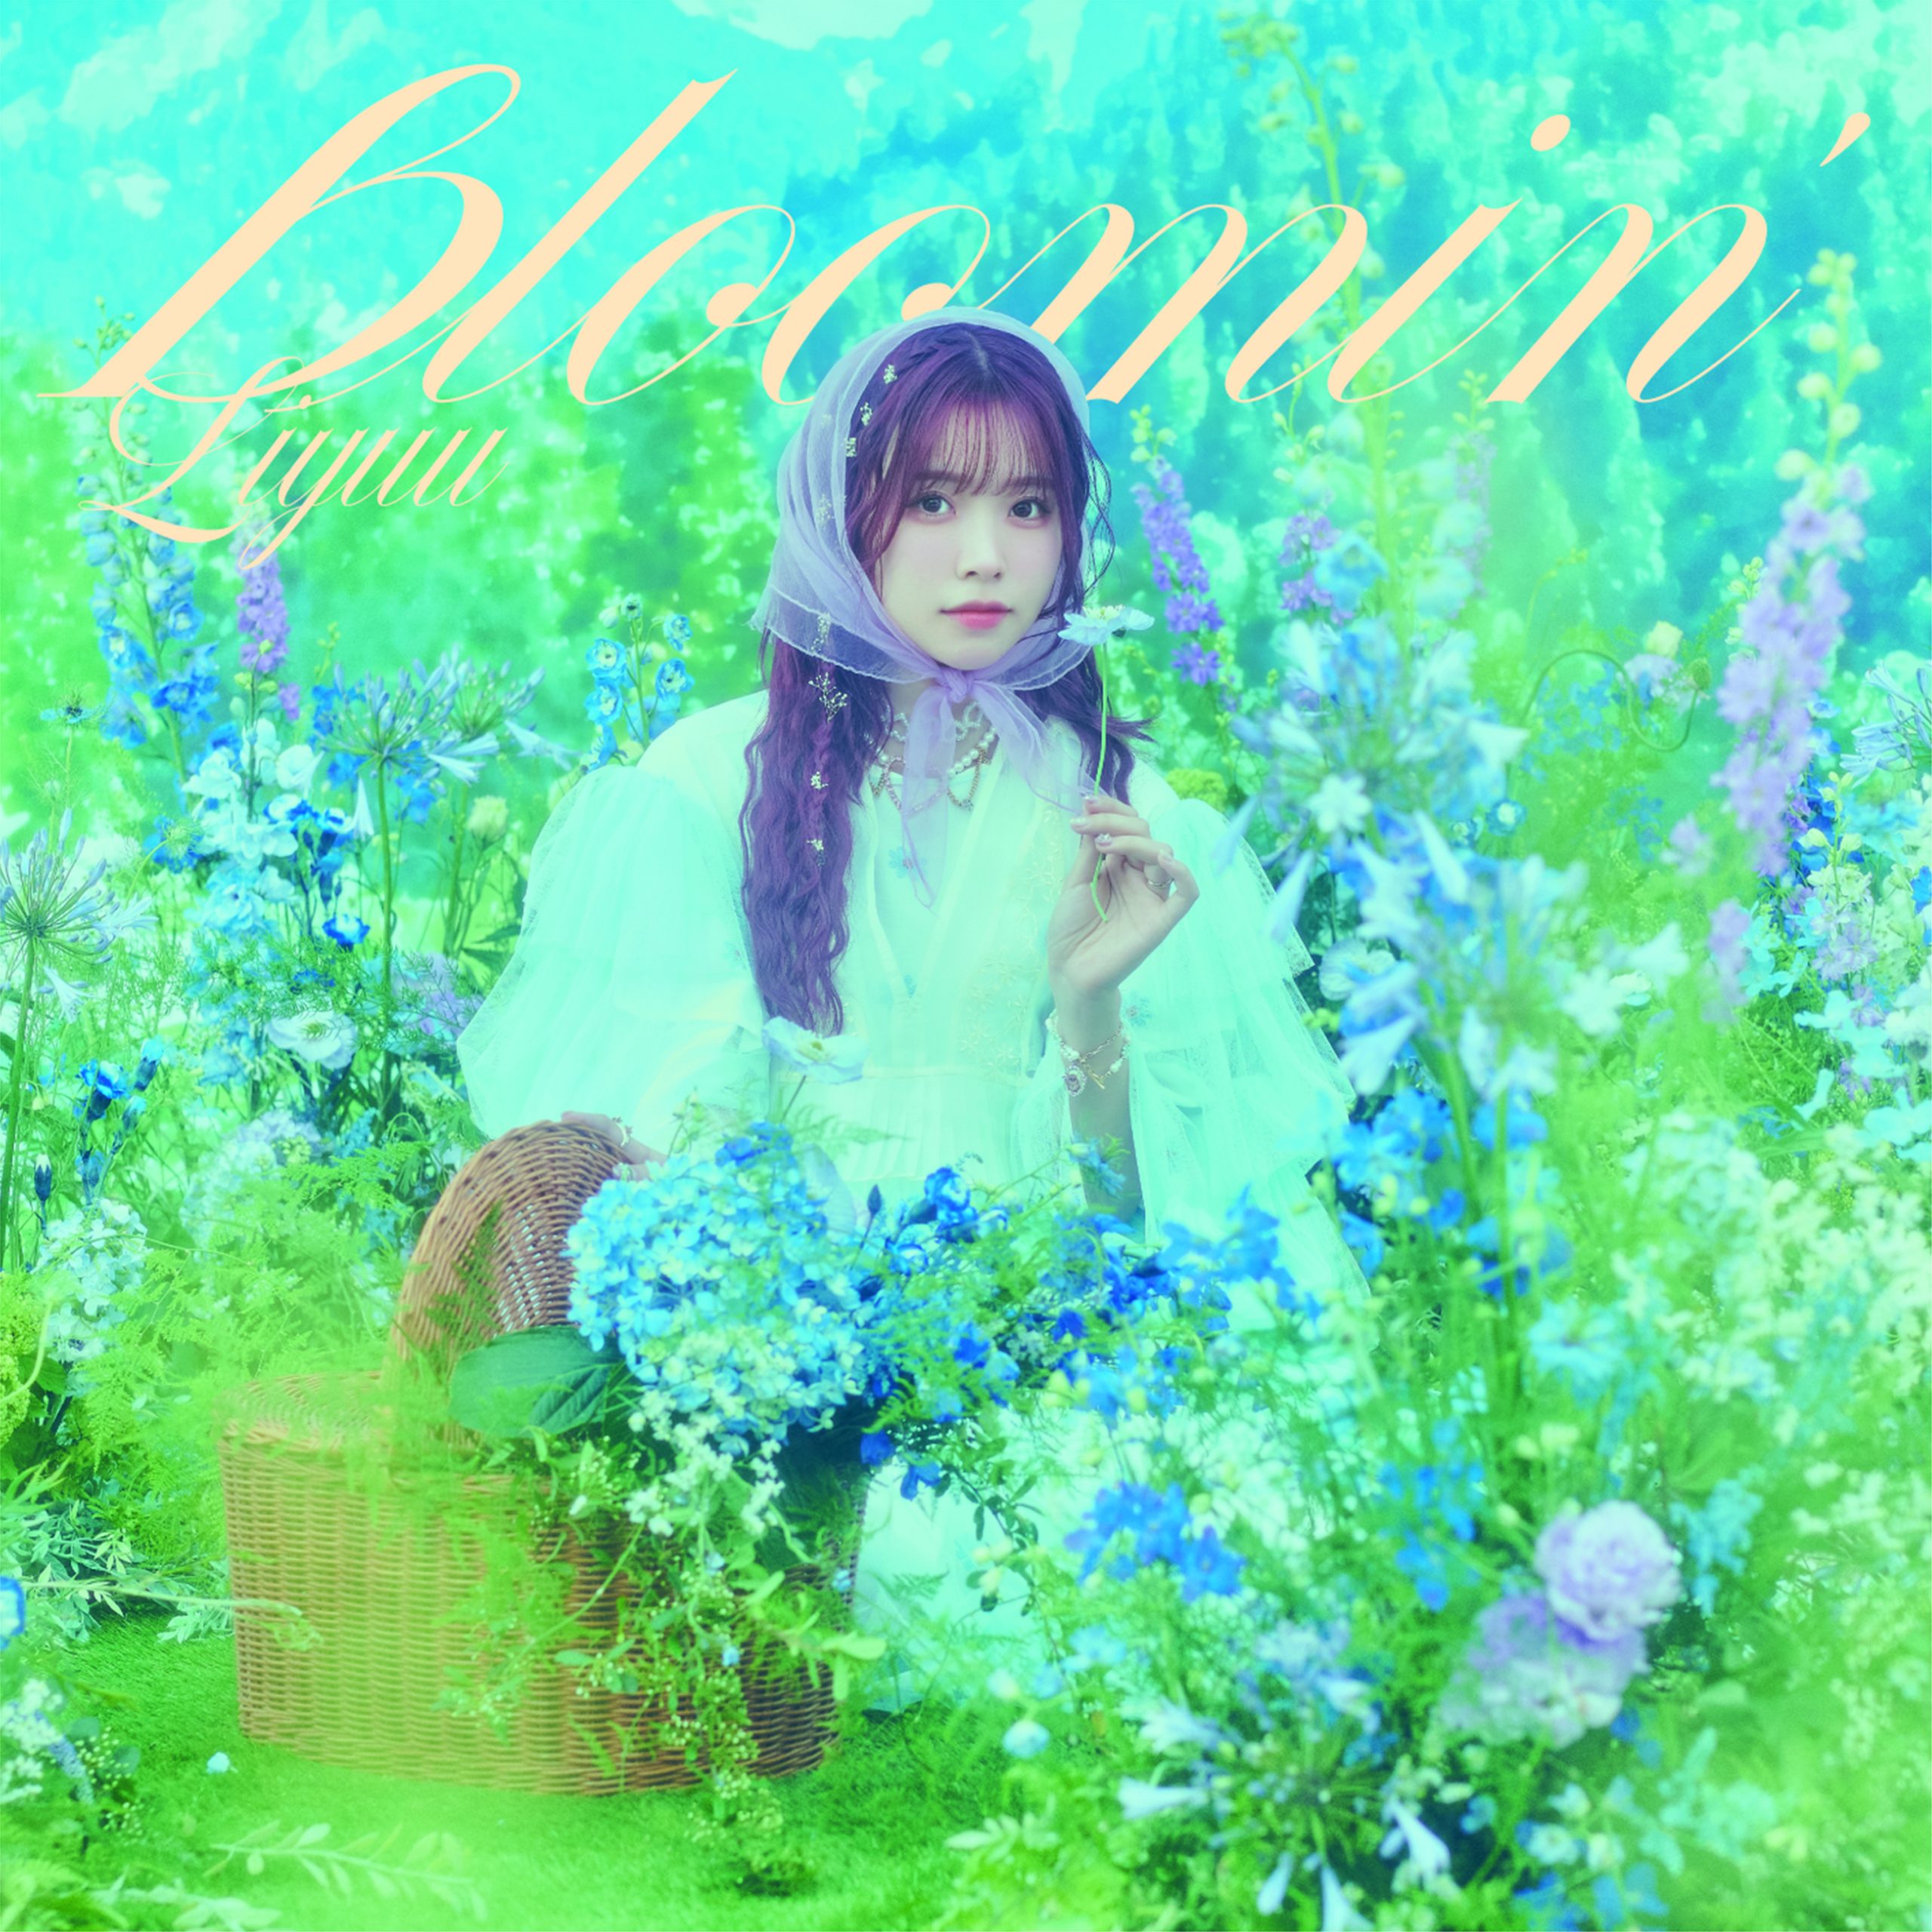 Liyuu_asya_tate_M Liyuu's 4th Single “Bloomin’” Out on August 30. Concert Tour 2023 “LOVE in koii” Coming to Blu-Ray on September 27!